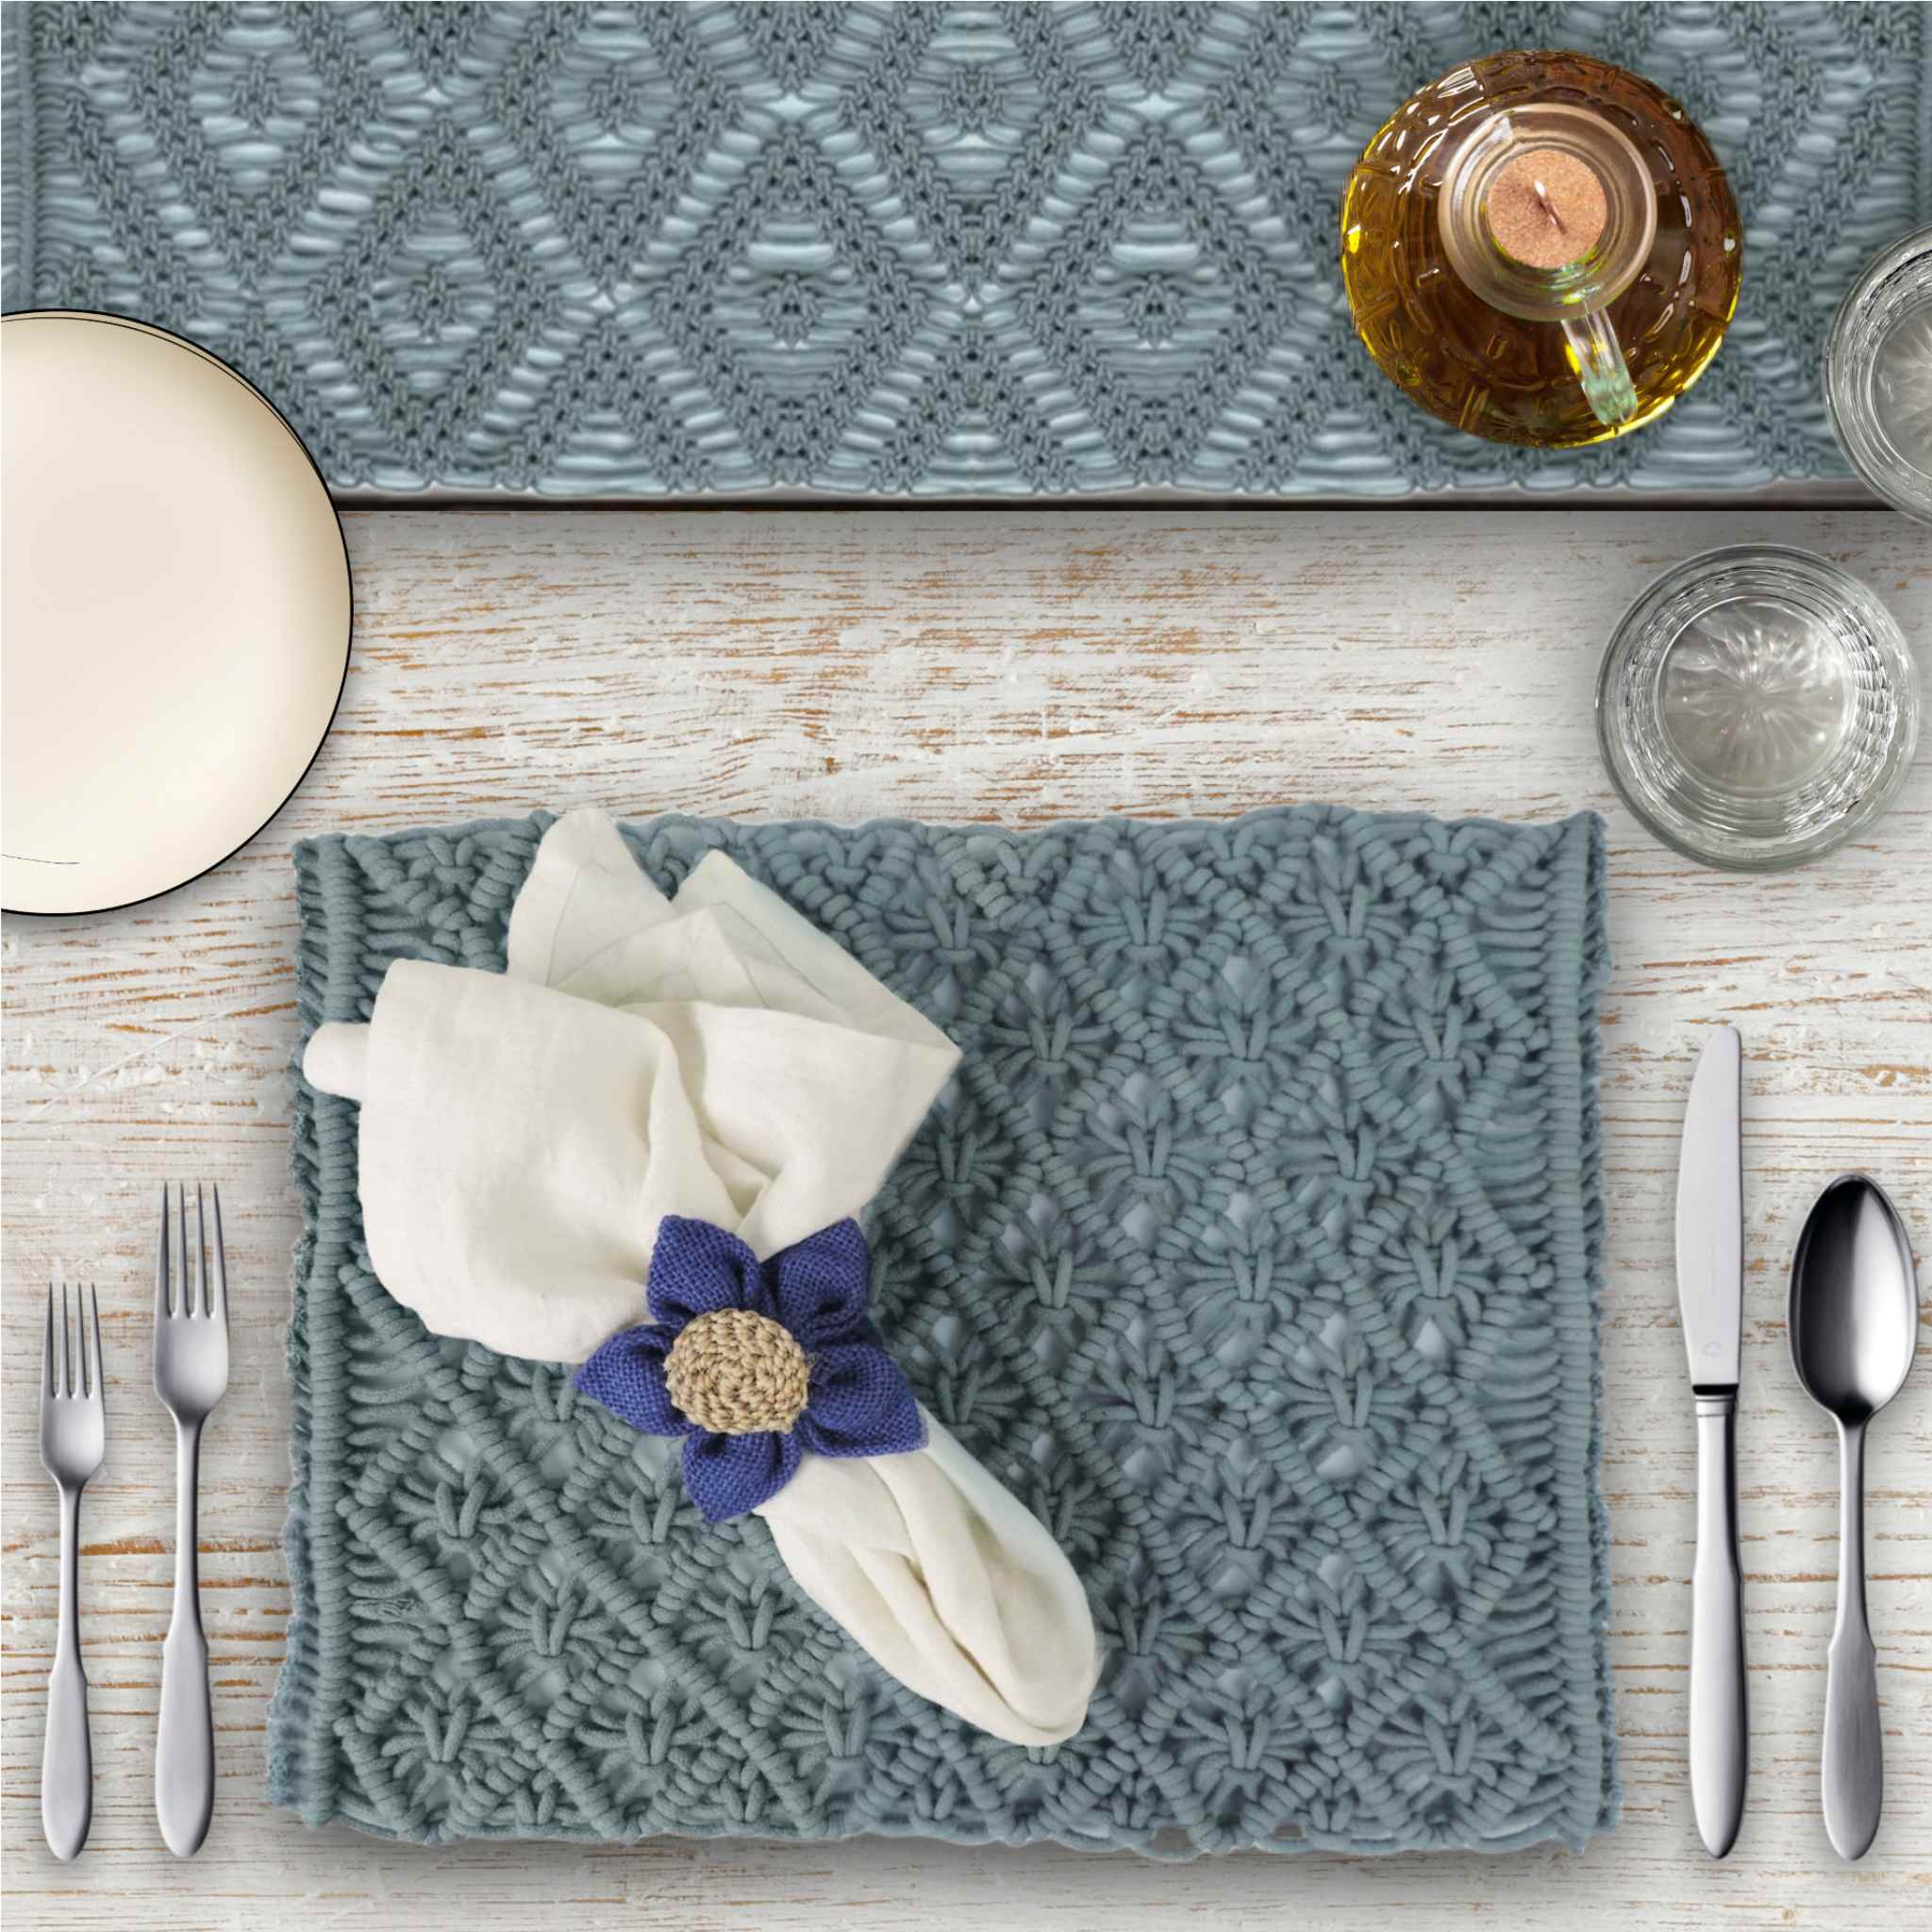 Macramé Table Setting for 4 - Placemats, Napkin Rings & Table Runner in Grey